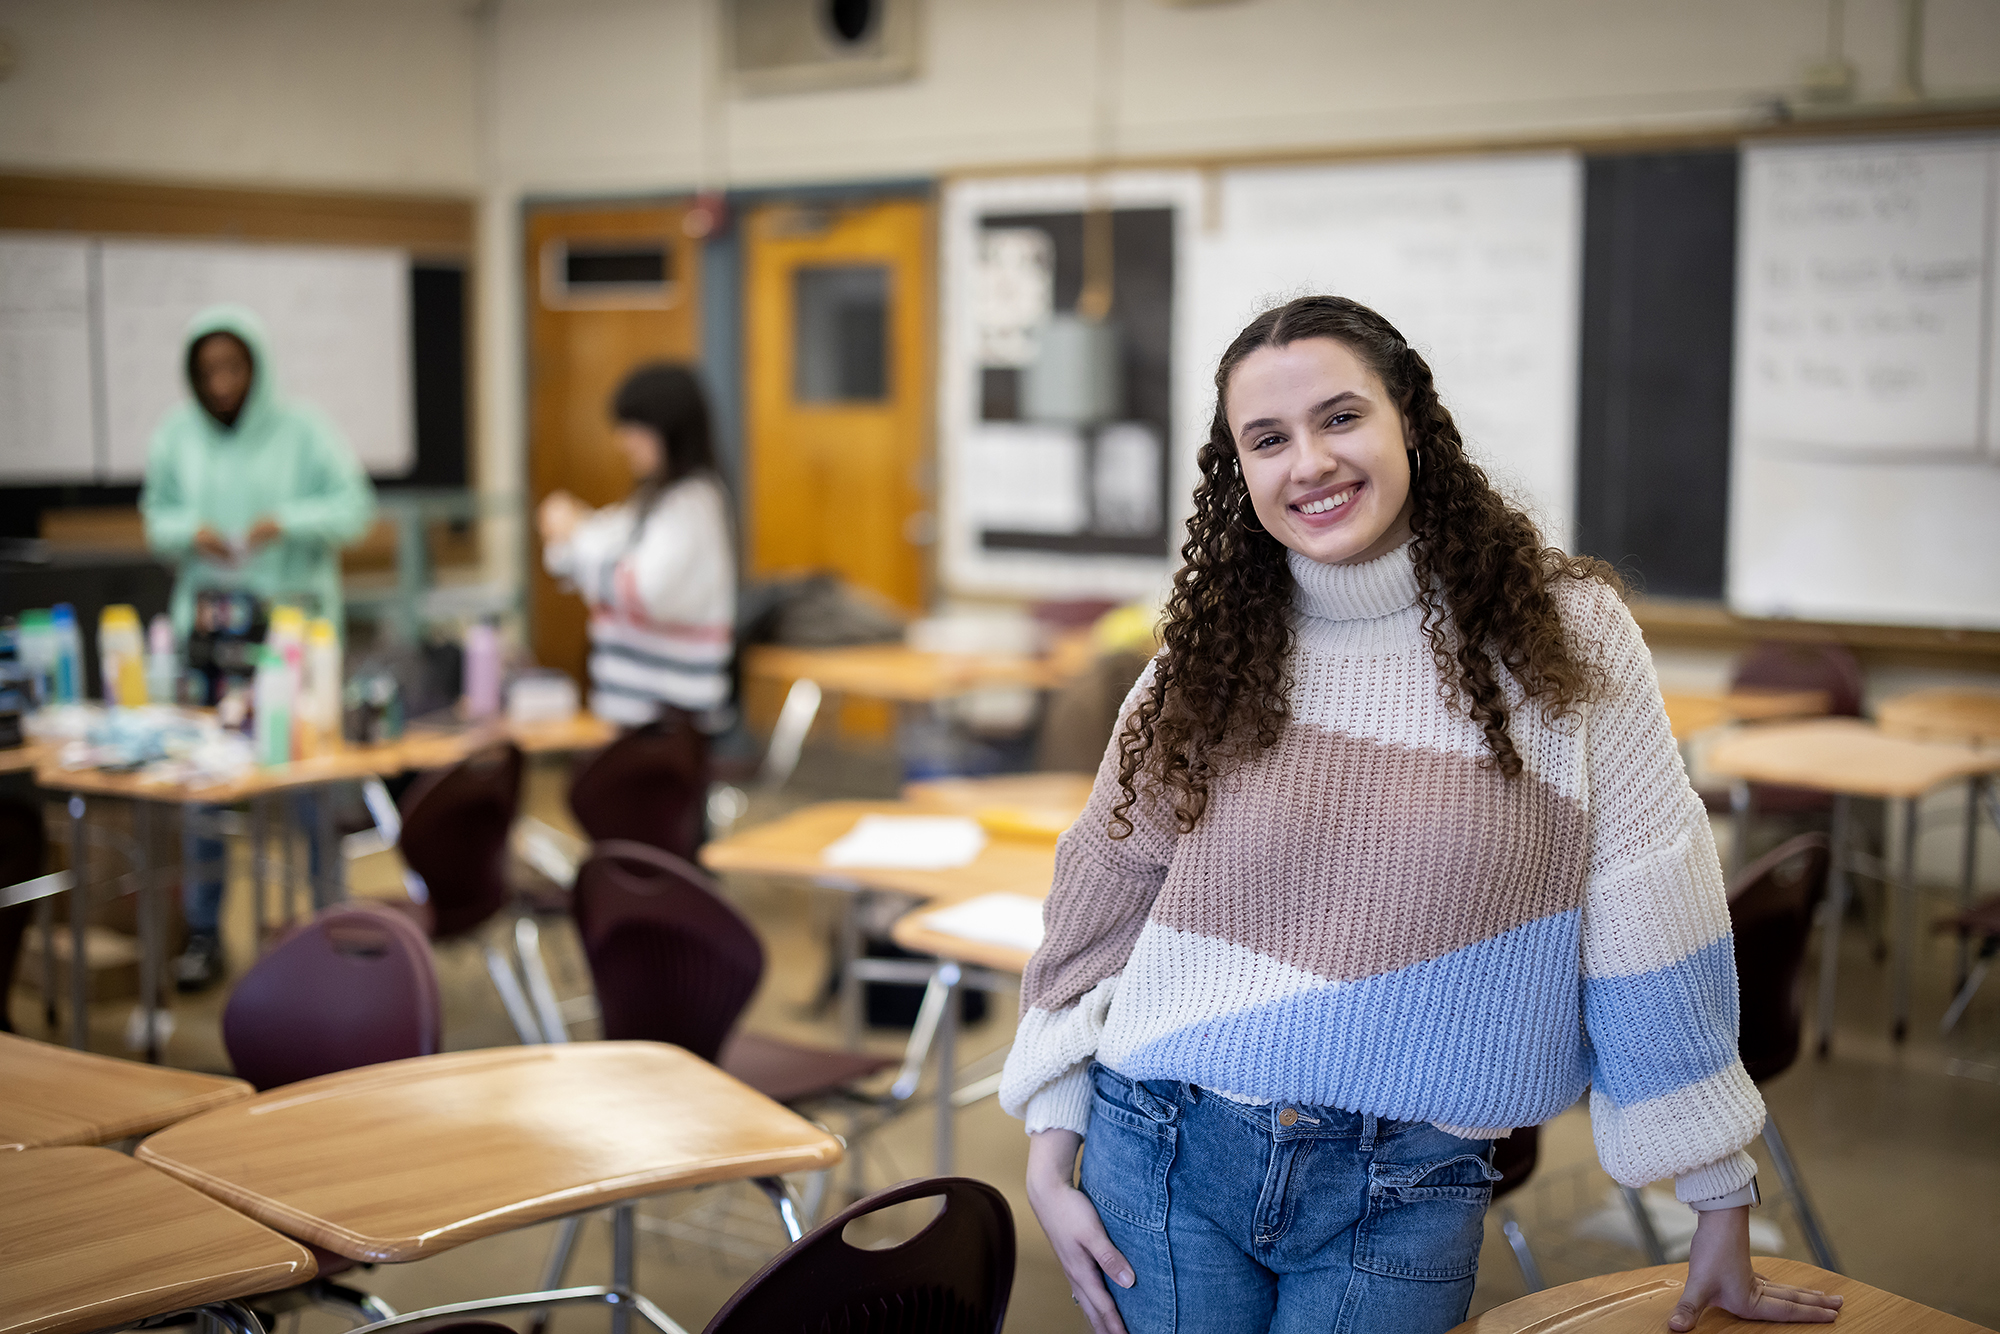 Ariana Jimenez stands in the foreground of a high school classroom